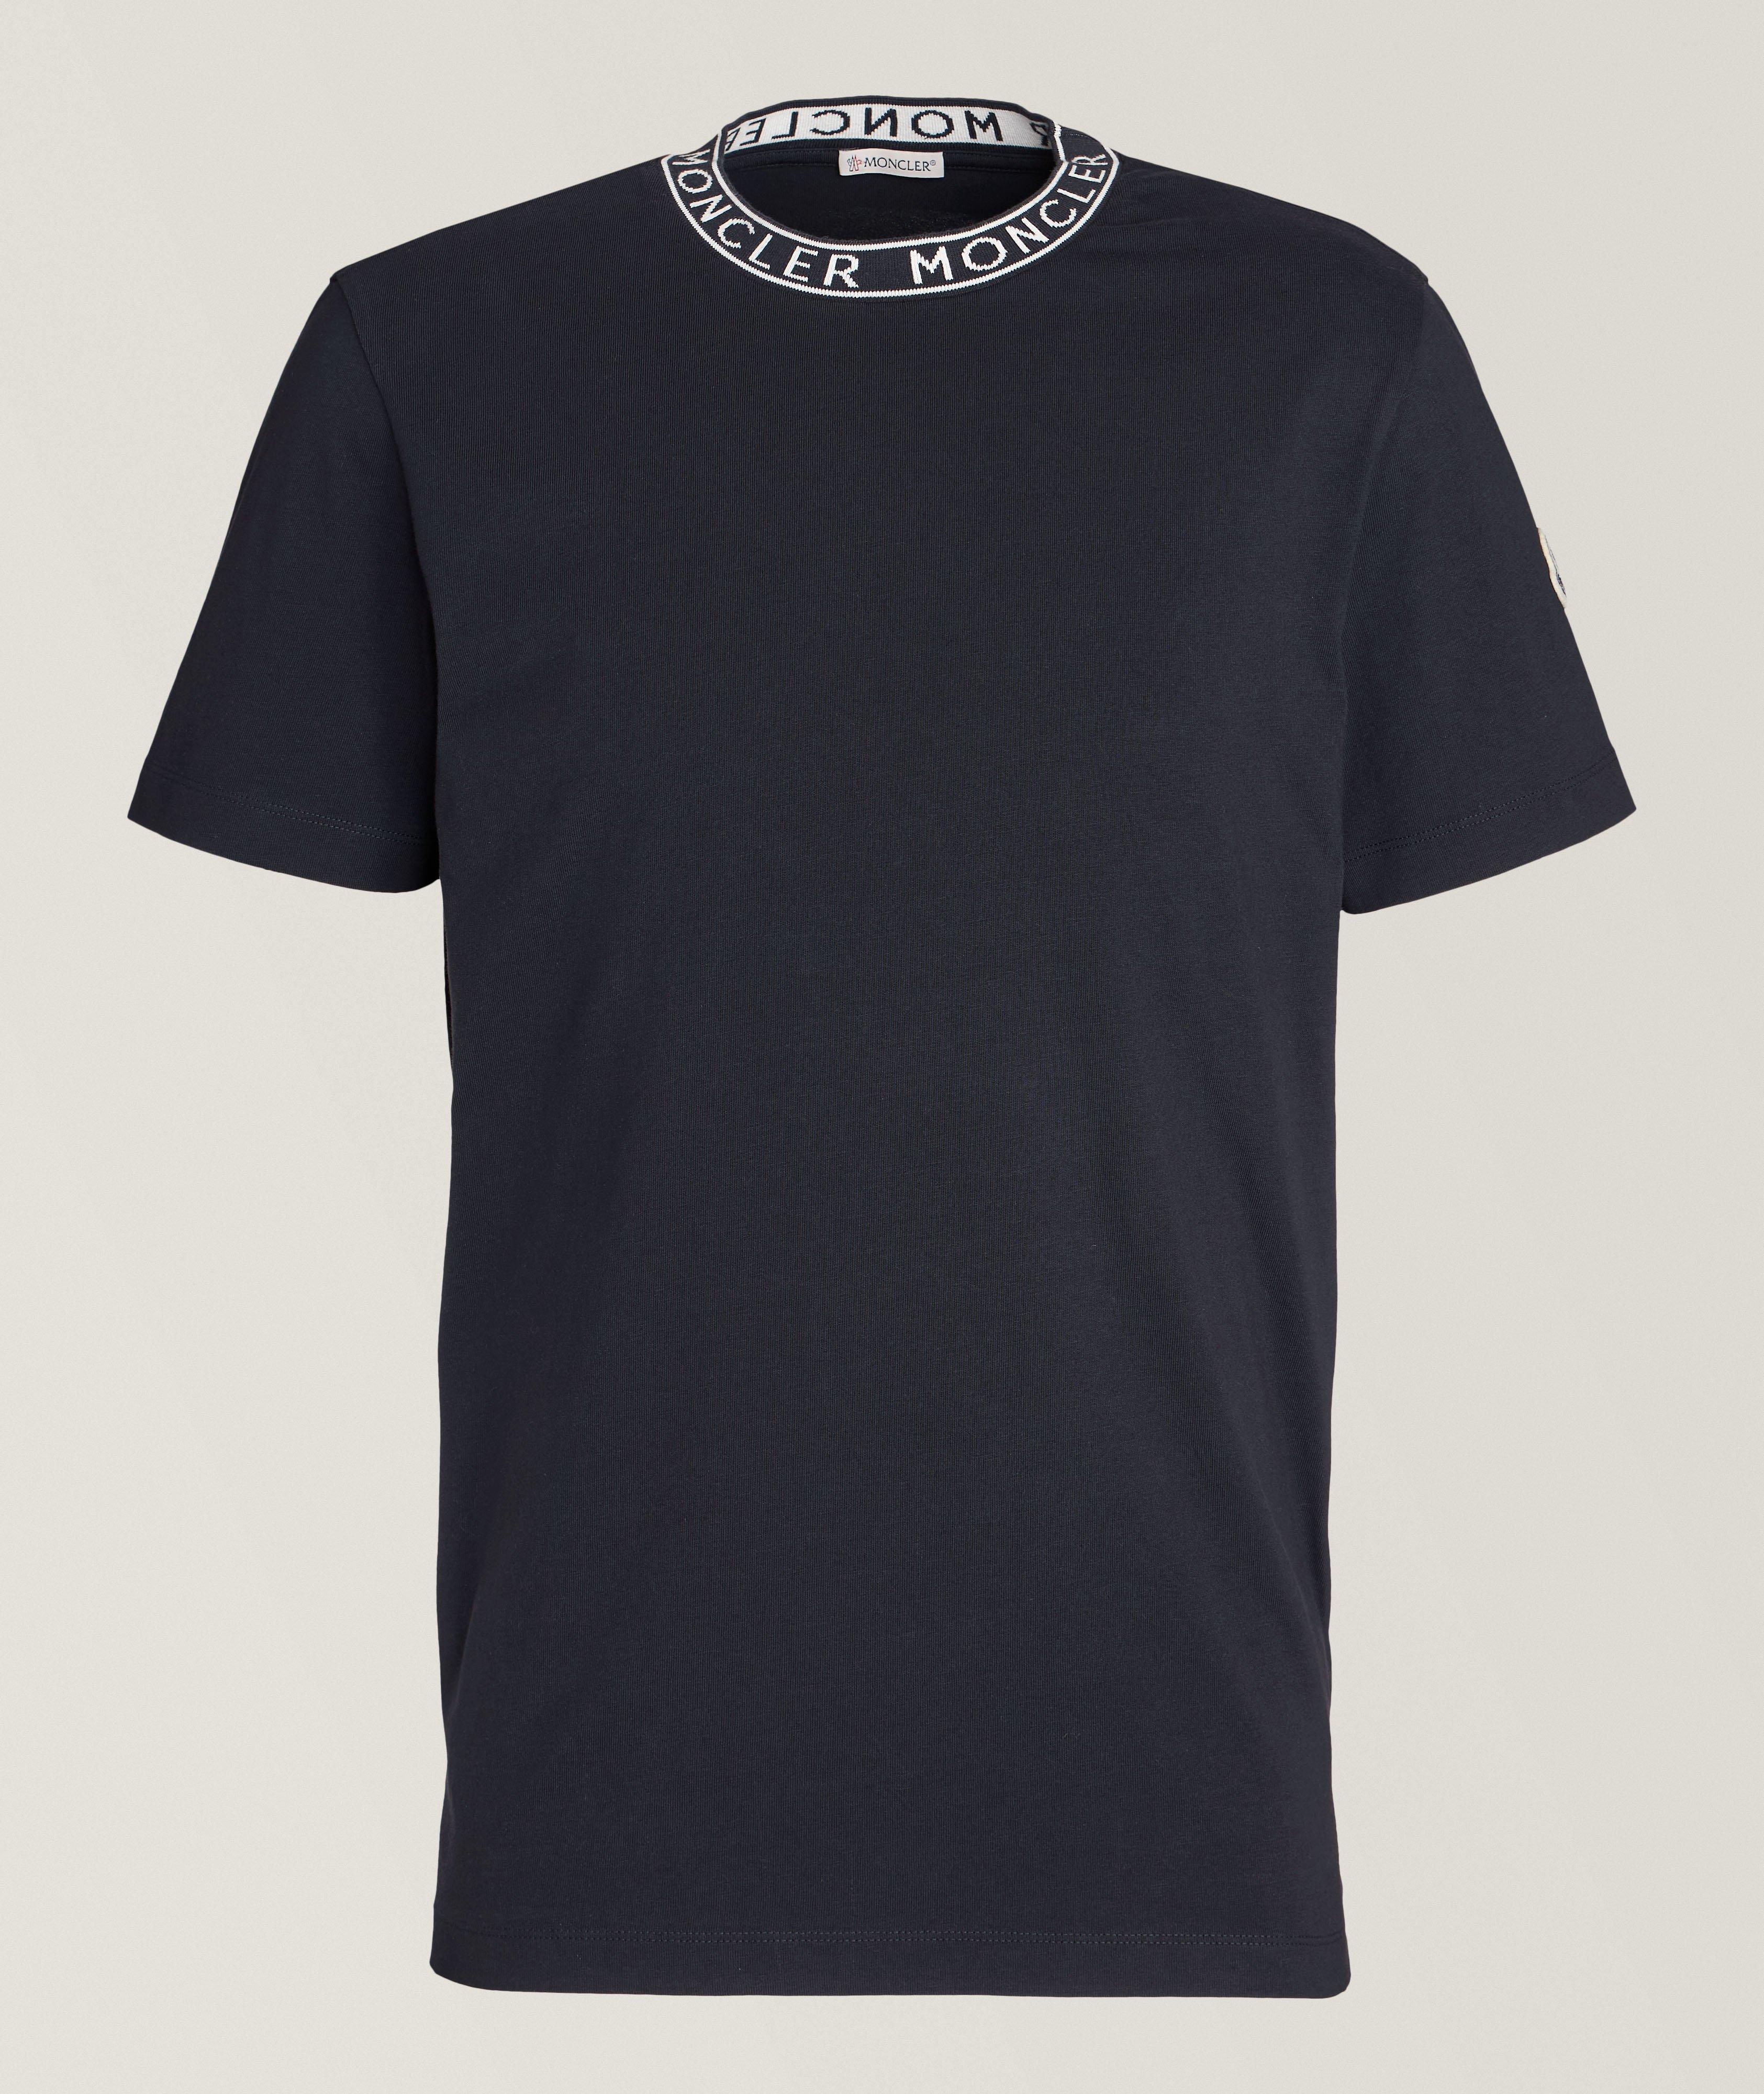 Logo Embroidered Collar Cotton T-Shirt  image 0